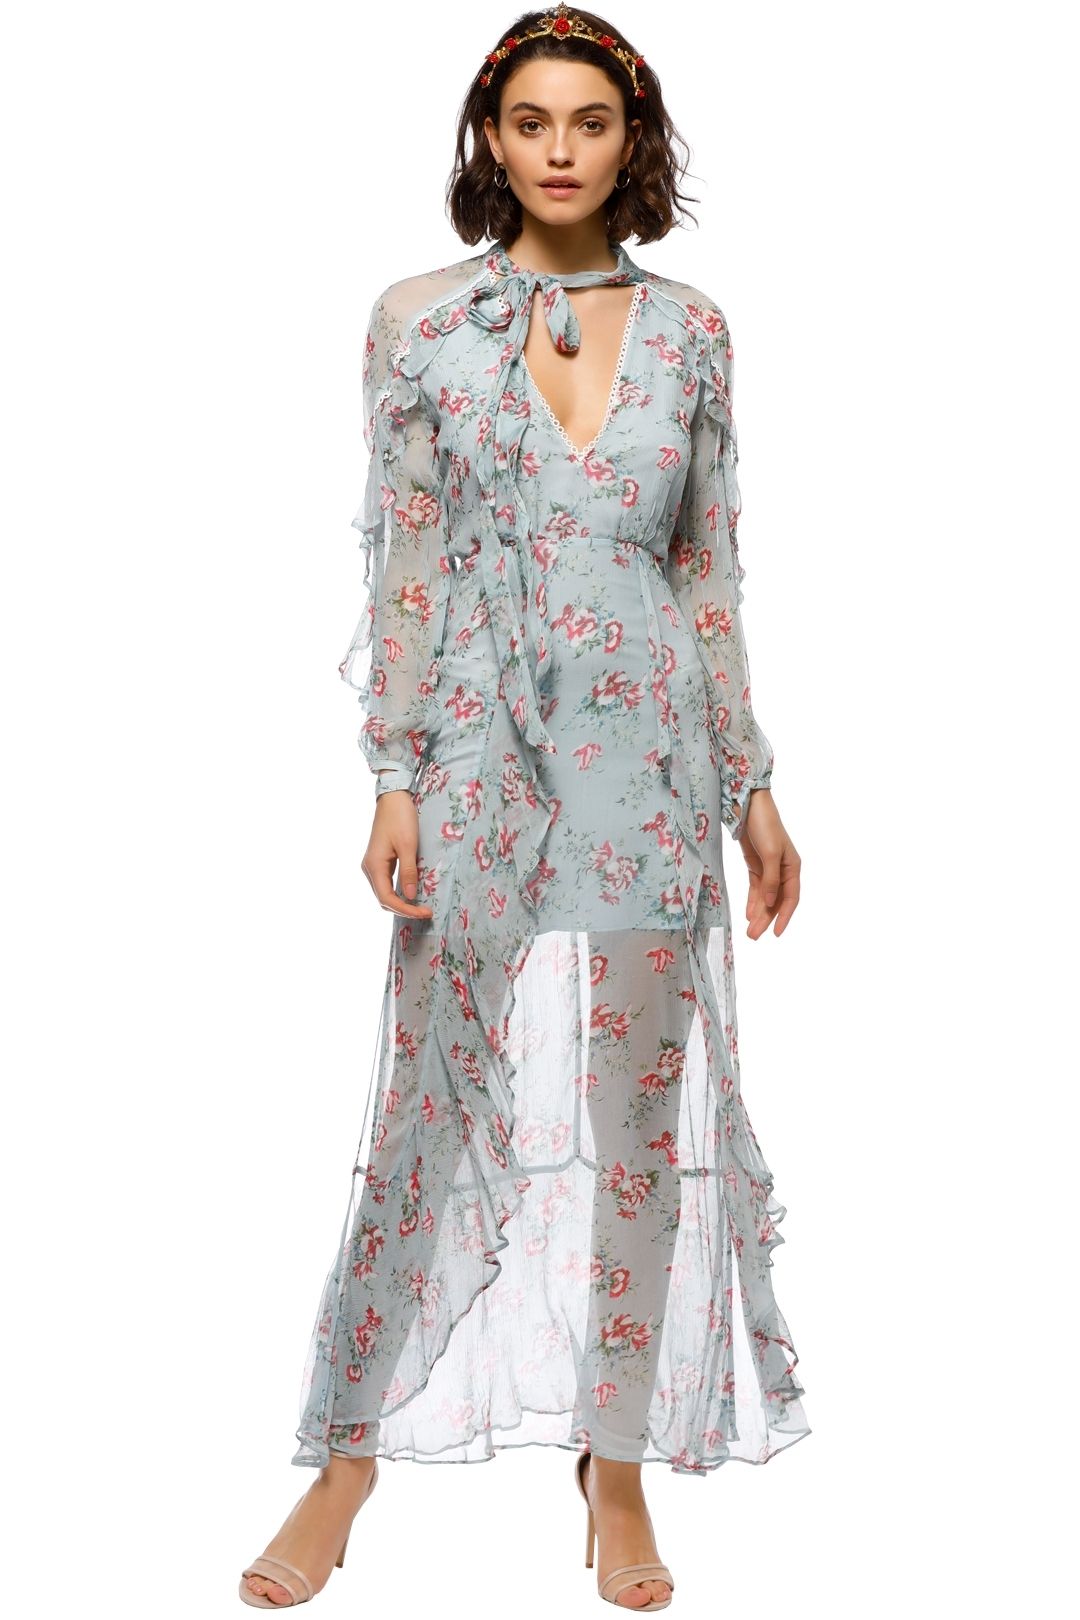 Talulah - The Knowing Midi Dress - Blue Floral - Front